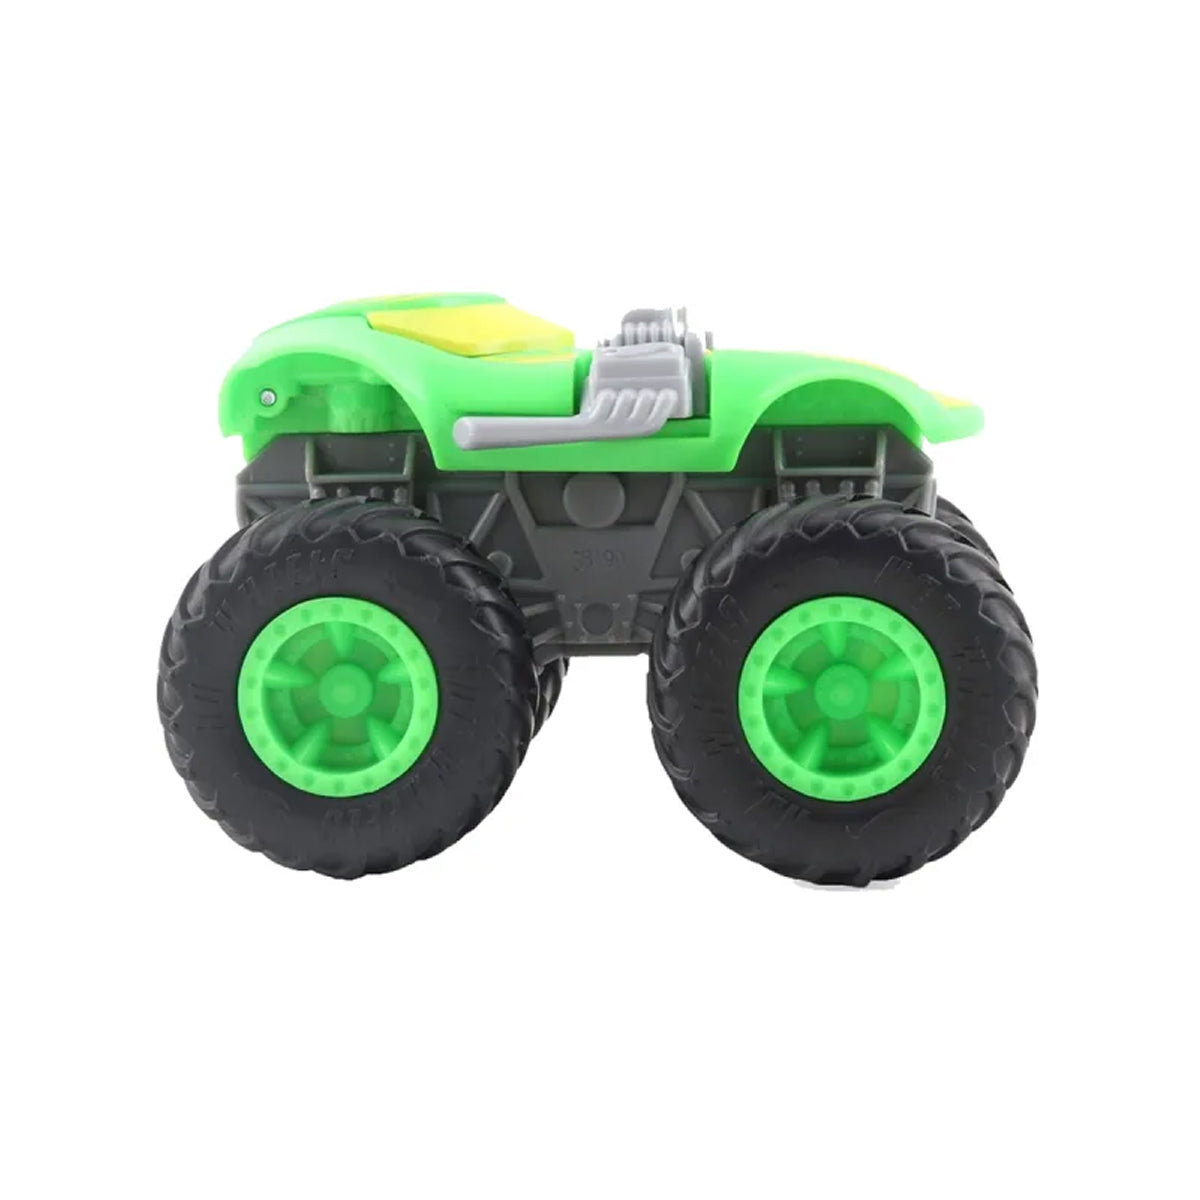 Buy Hot Wheels 1:64 Scale Crush Delivery Monster Truck for Ages 3+